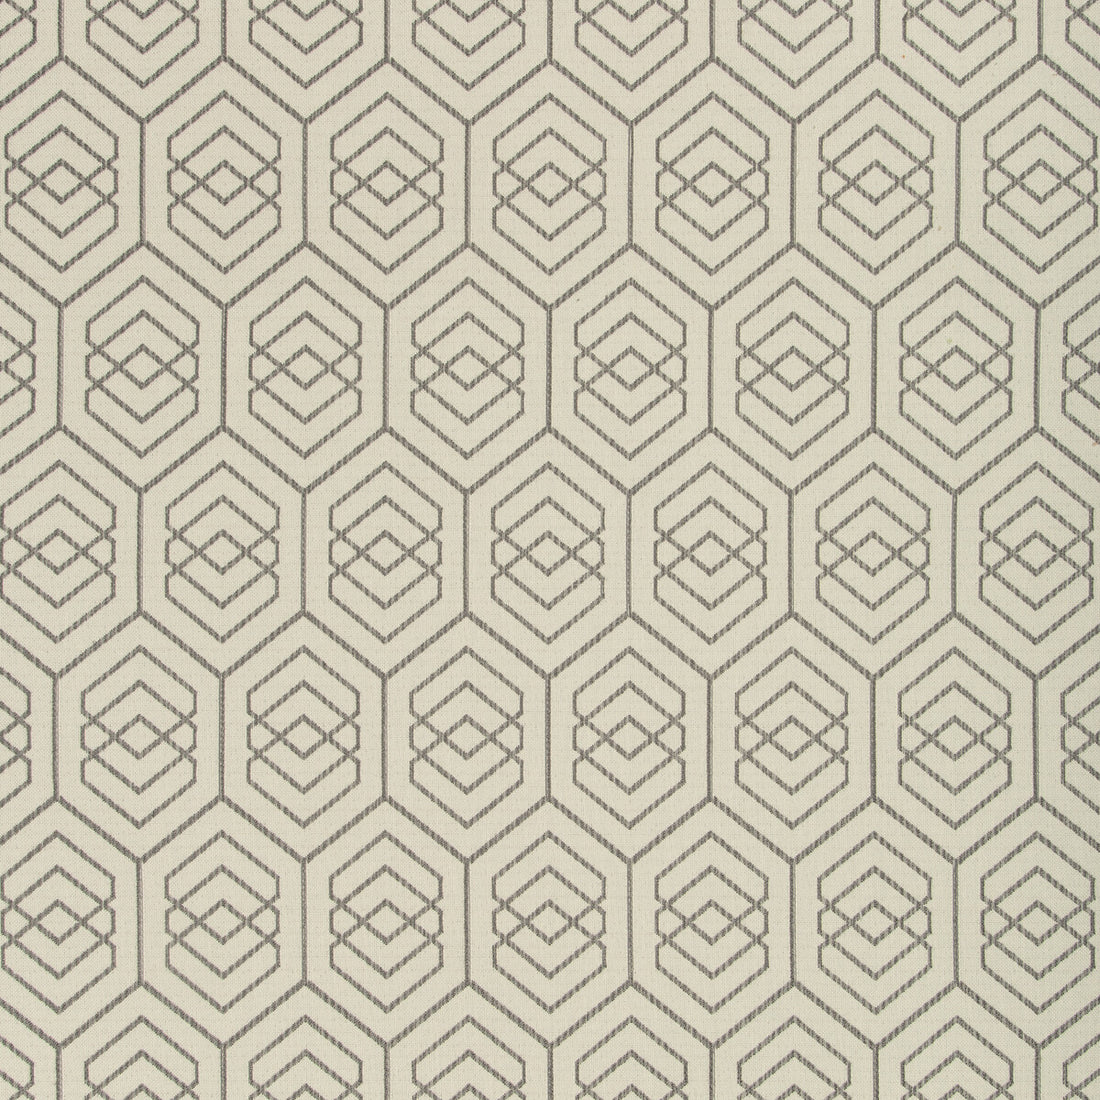 Fiscoe fabric in steel color - pattern 32824.11.0 - by Kravet Basics in the Thom Filicia collection